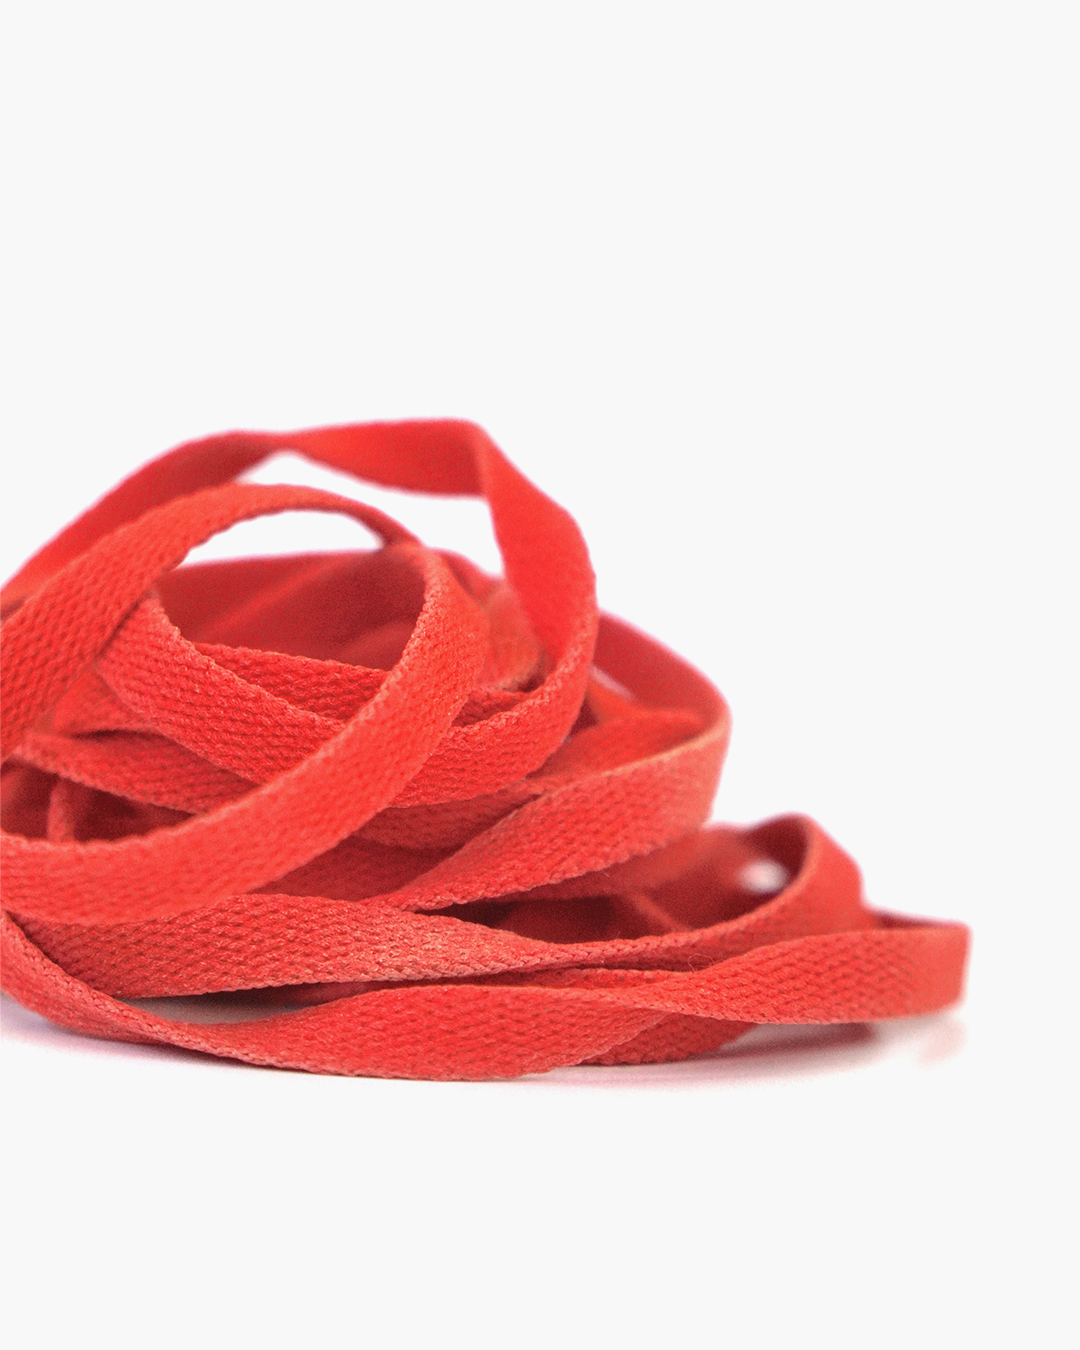 Entropy.Edit Faded Shoelaces - Red